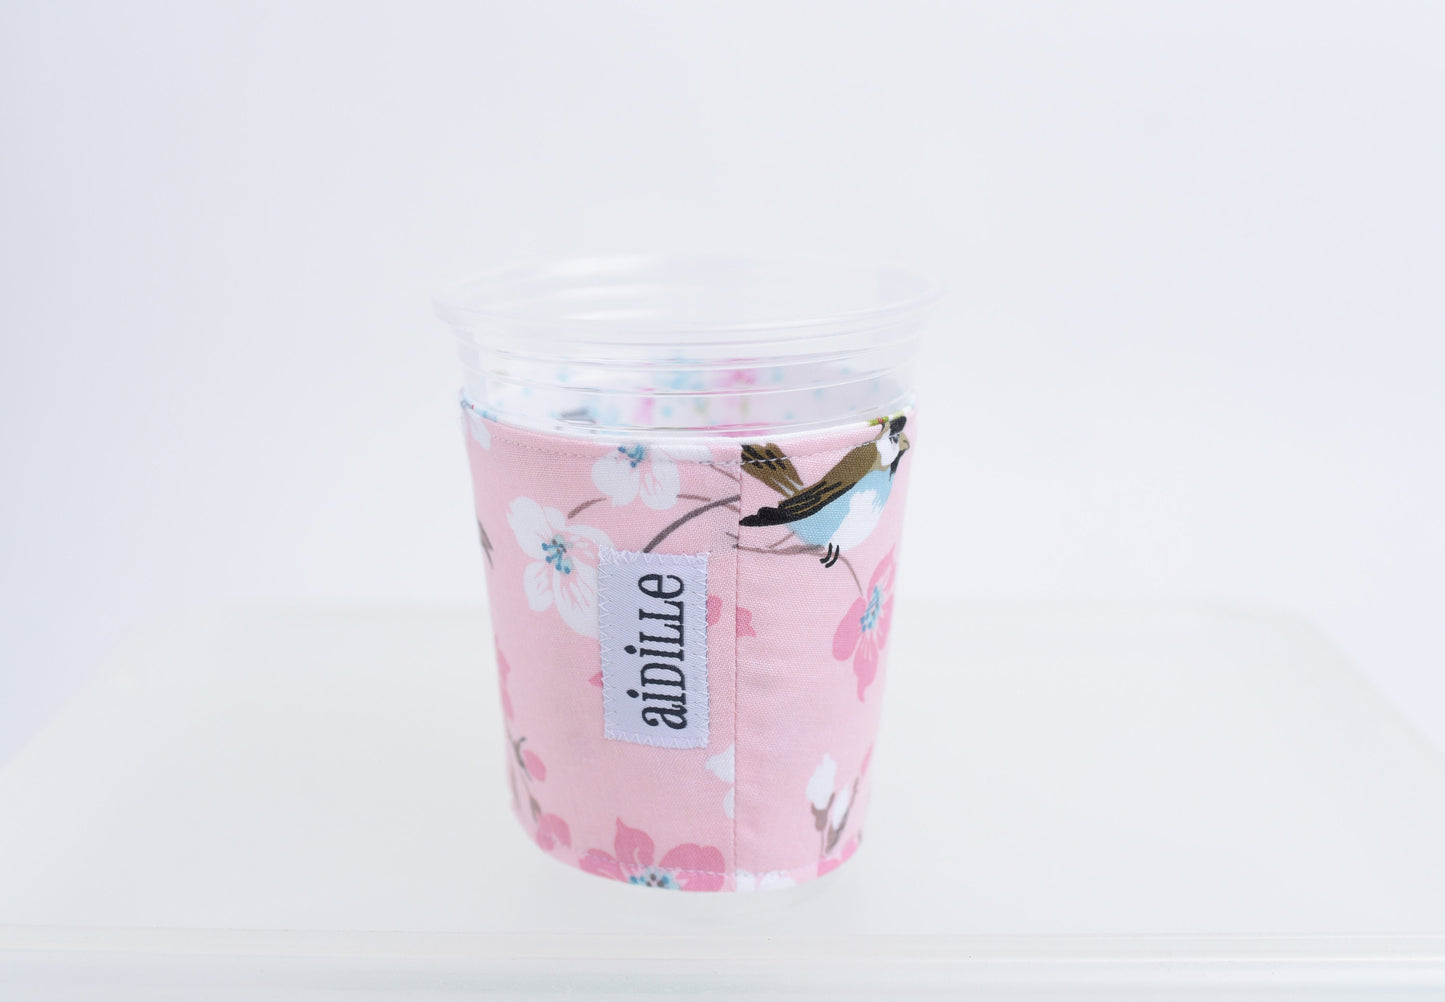 Blue Bird with Rose Reversible Fabric Coffee Sleeve